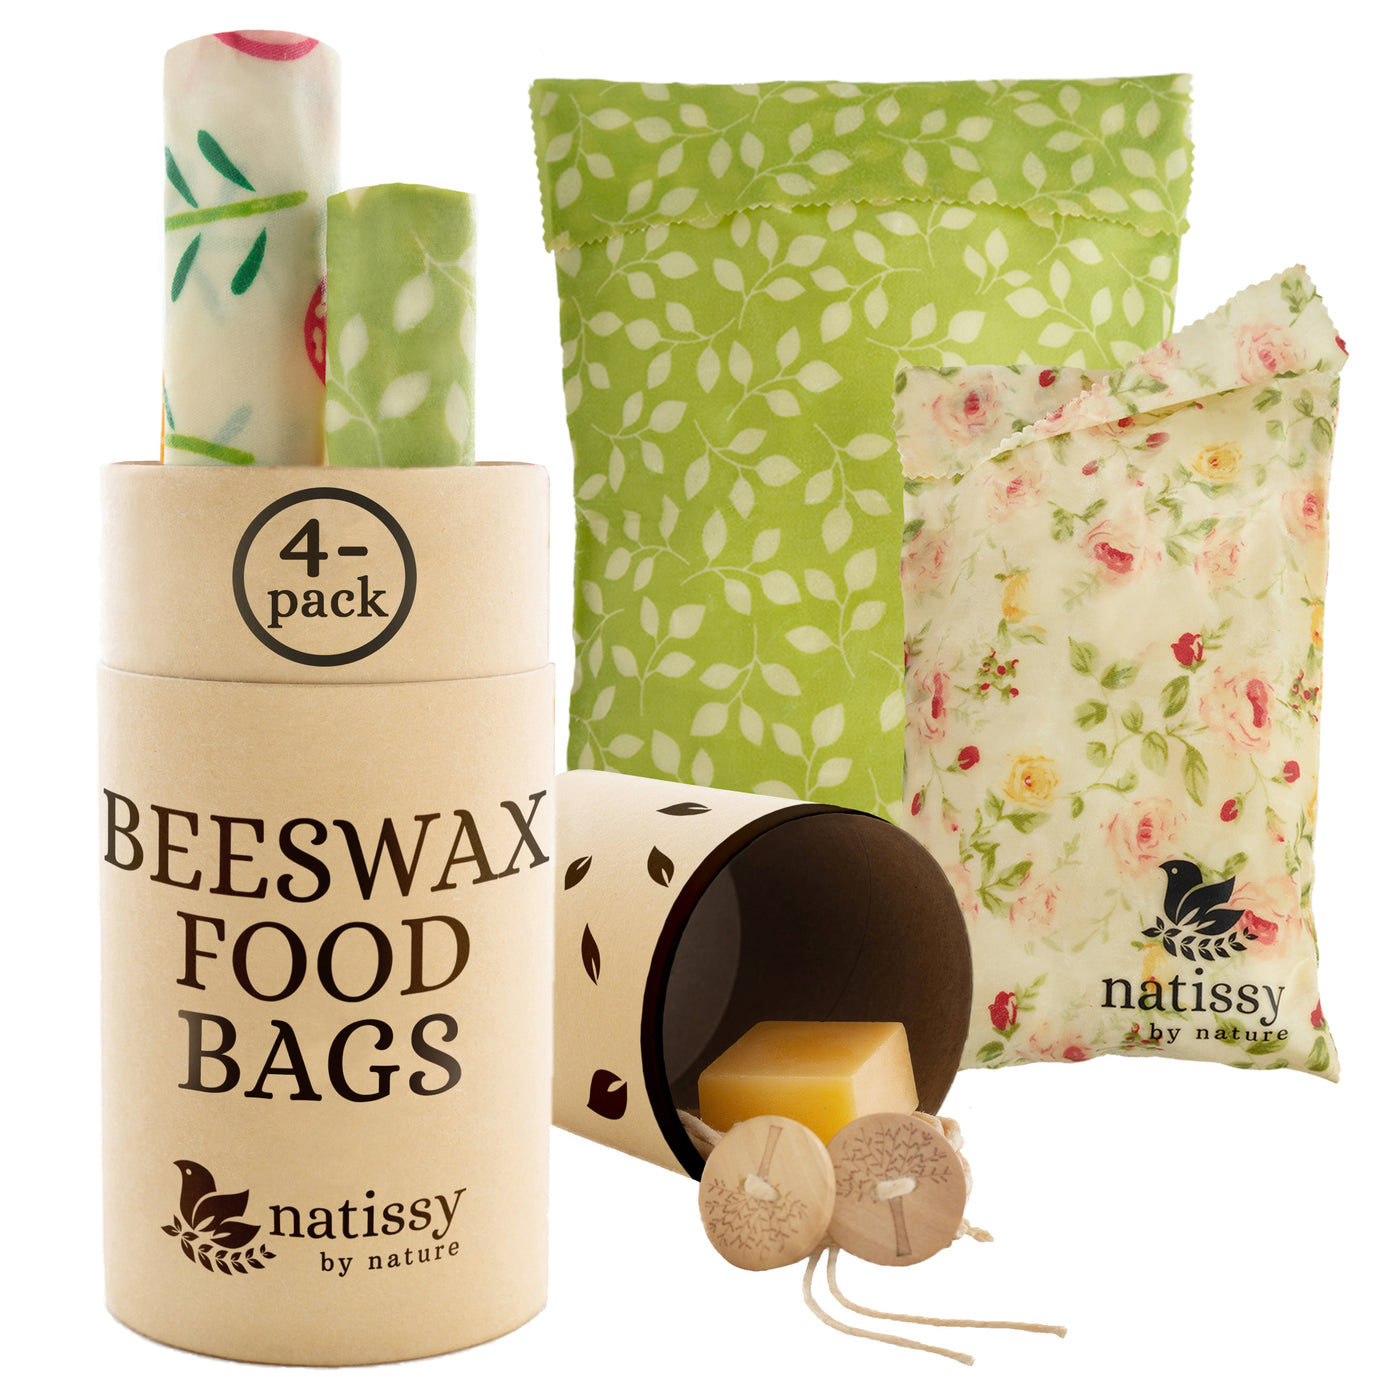 Beeswax Bags, Set of 4 Sustainable & Eco-Friendly Waxed Food Storage Bags - Flowers